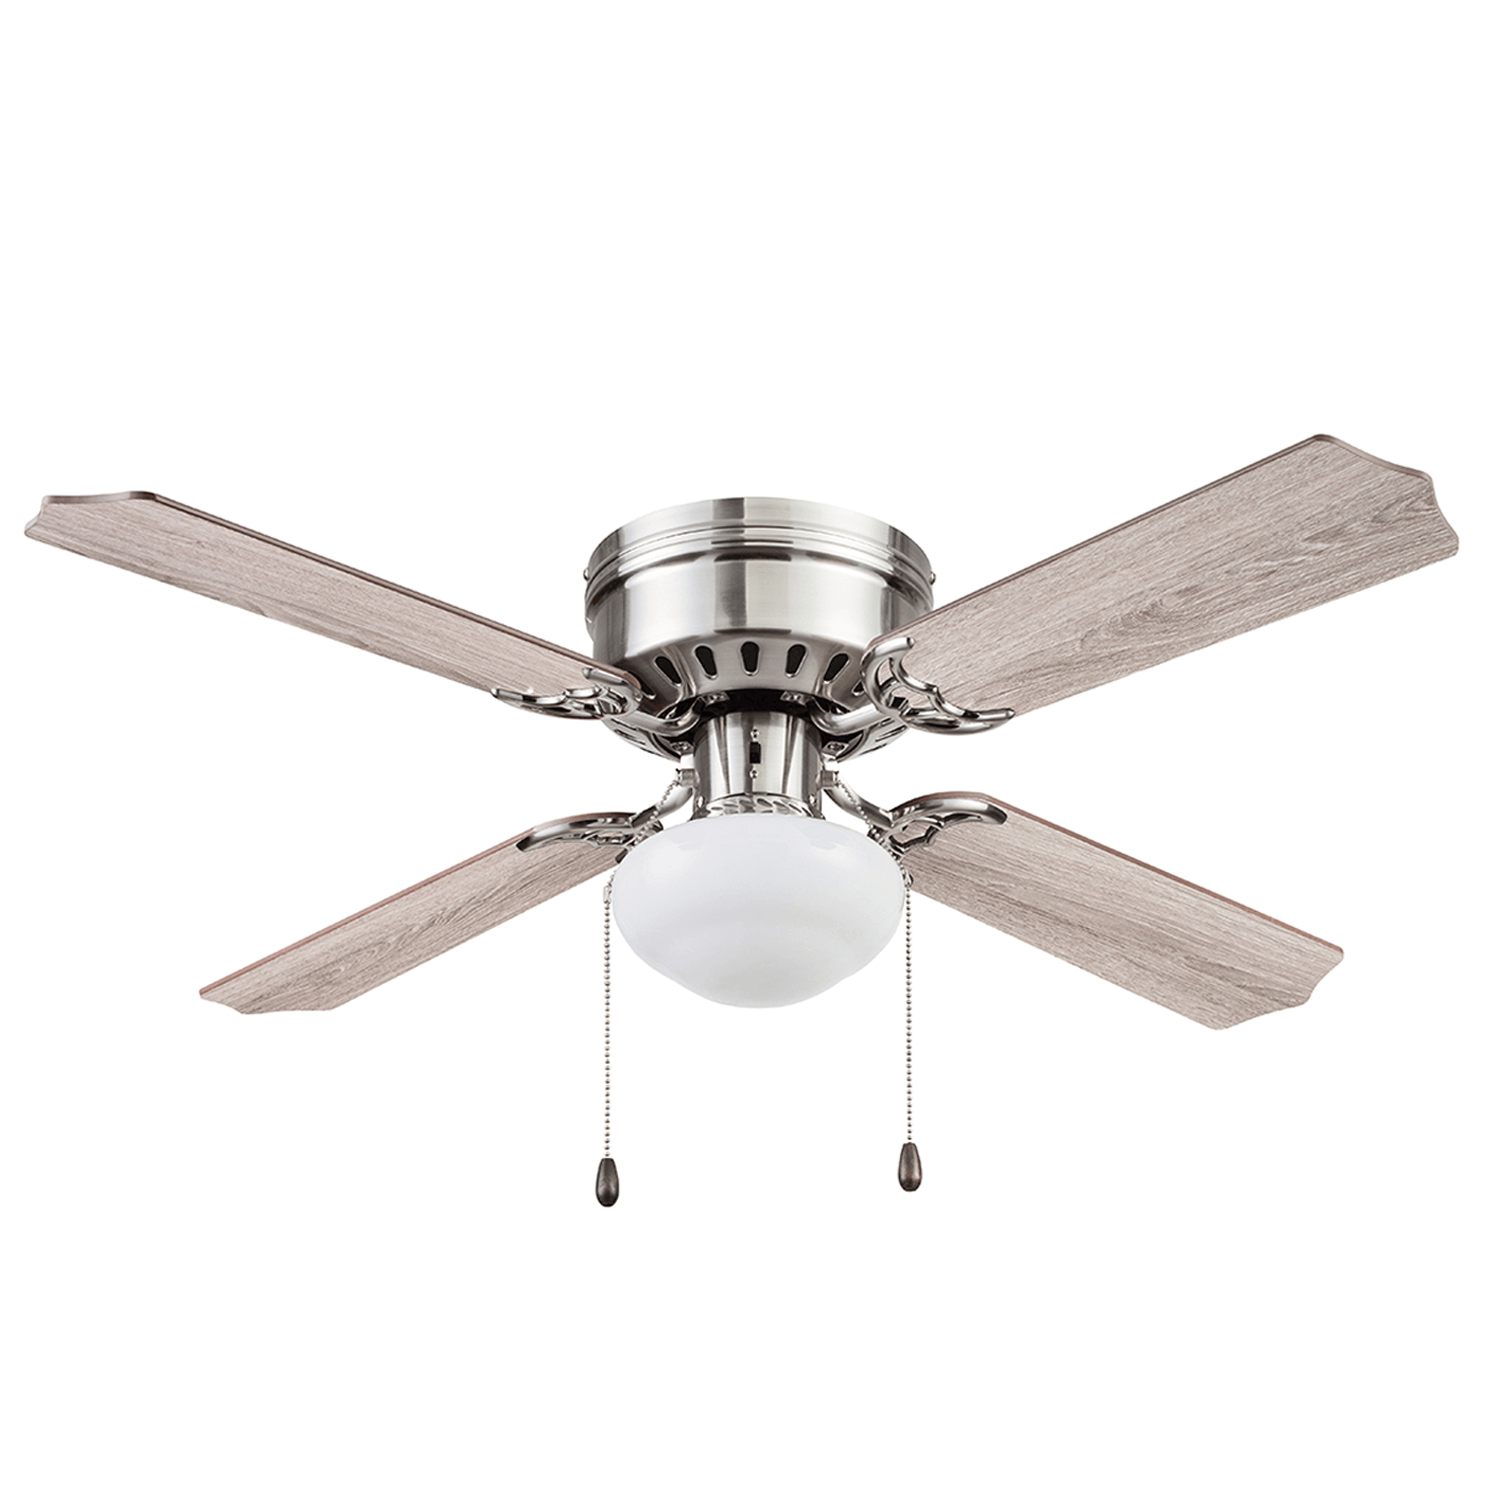 42 Inch Cherry Hill, Brushed Nickel, Pull Chain, Ceiling Fan by Prominence Home